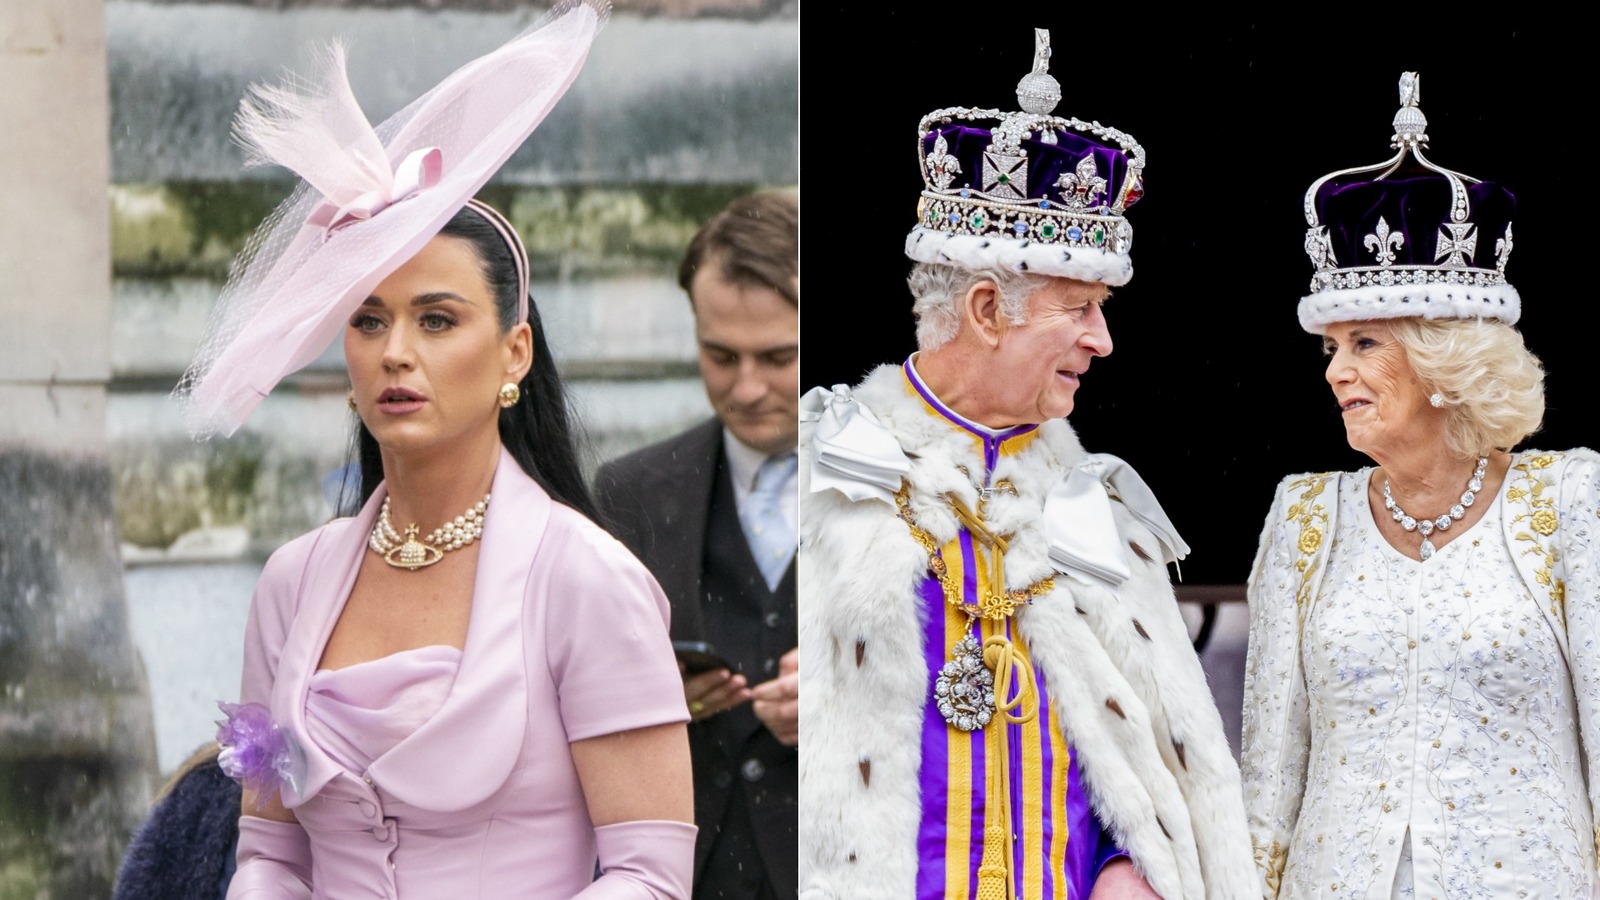 Katy Perry Had An Awkward Run-In With King Charles And Queen Camilla (Actually)